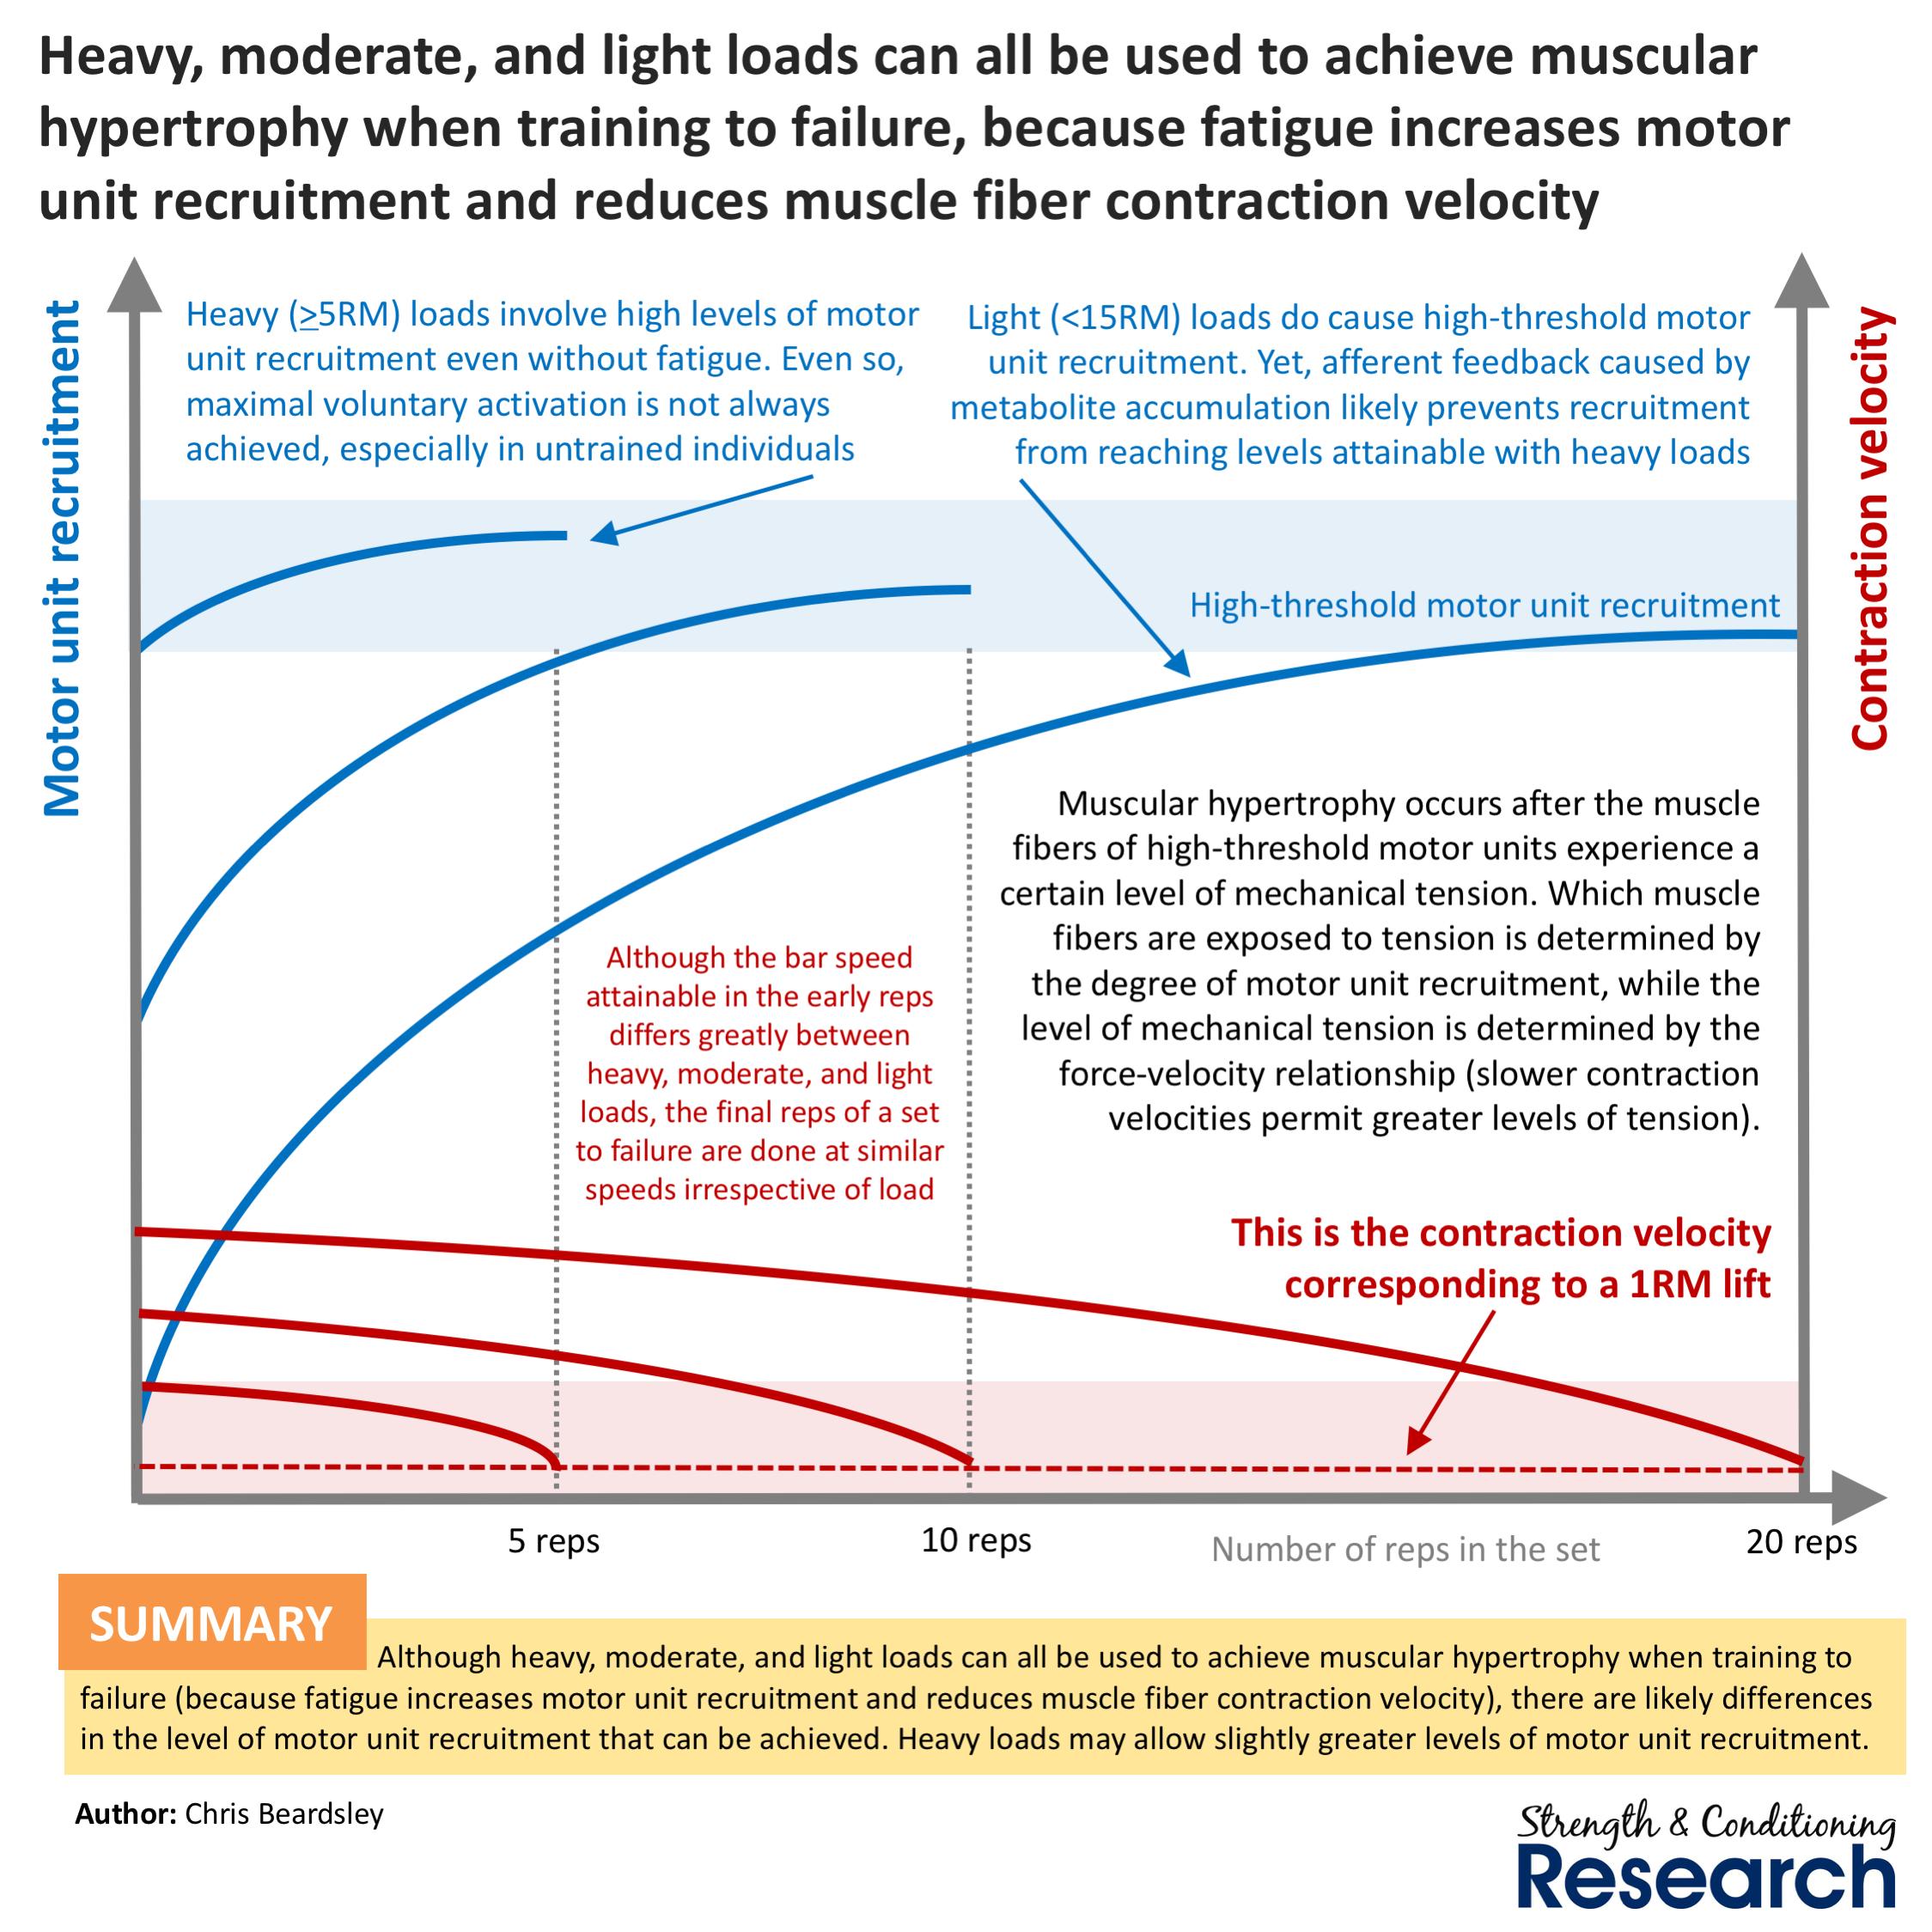 Chris Beardsley on X: Heavy, moderate, and light load strength training  can all be used effectively for gaining muscle size, and generally cause  similar results. However, there may be a slight benefit